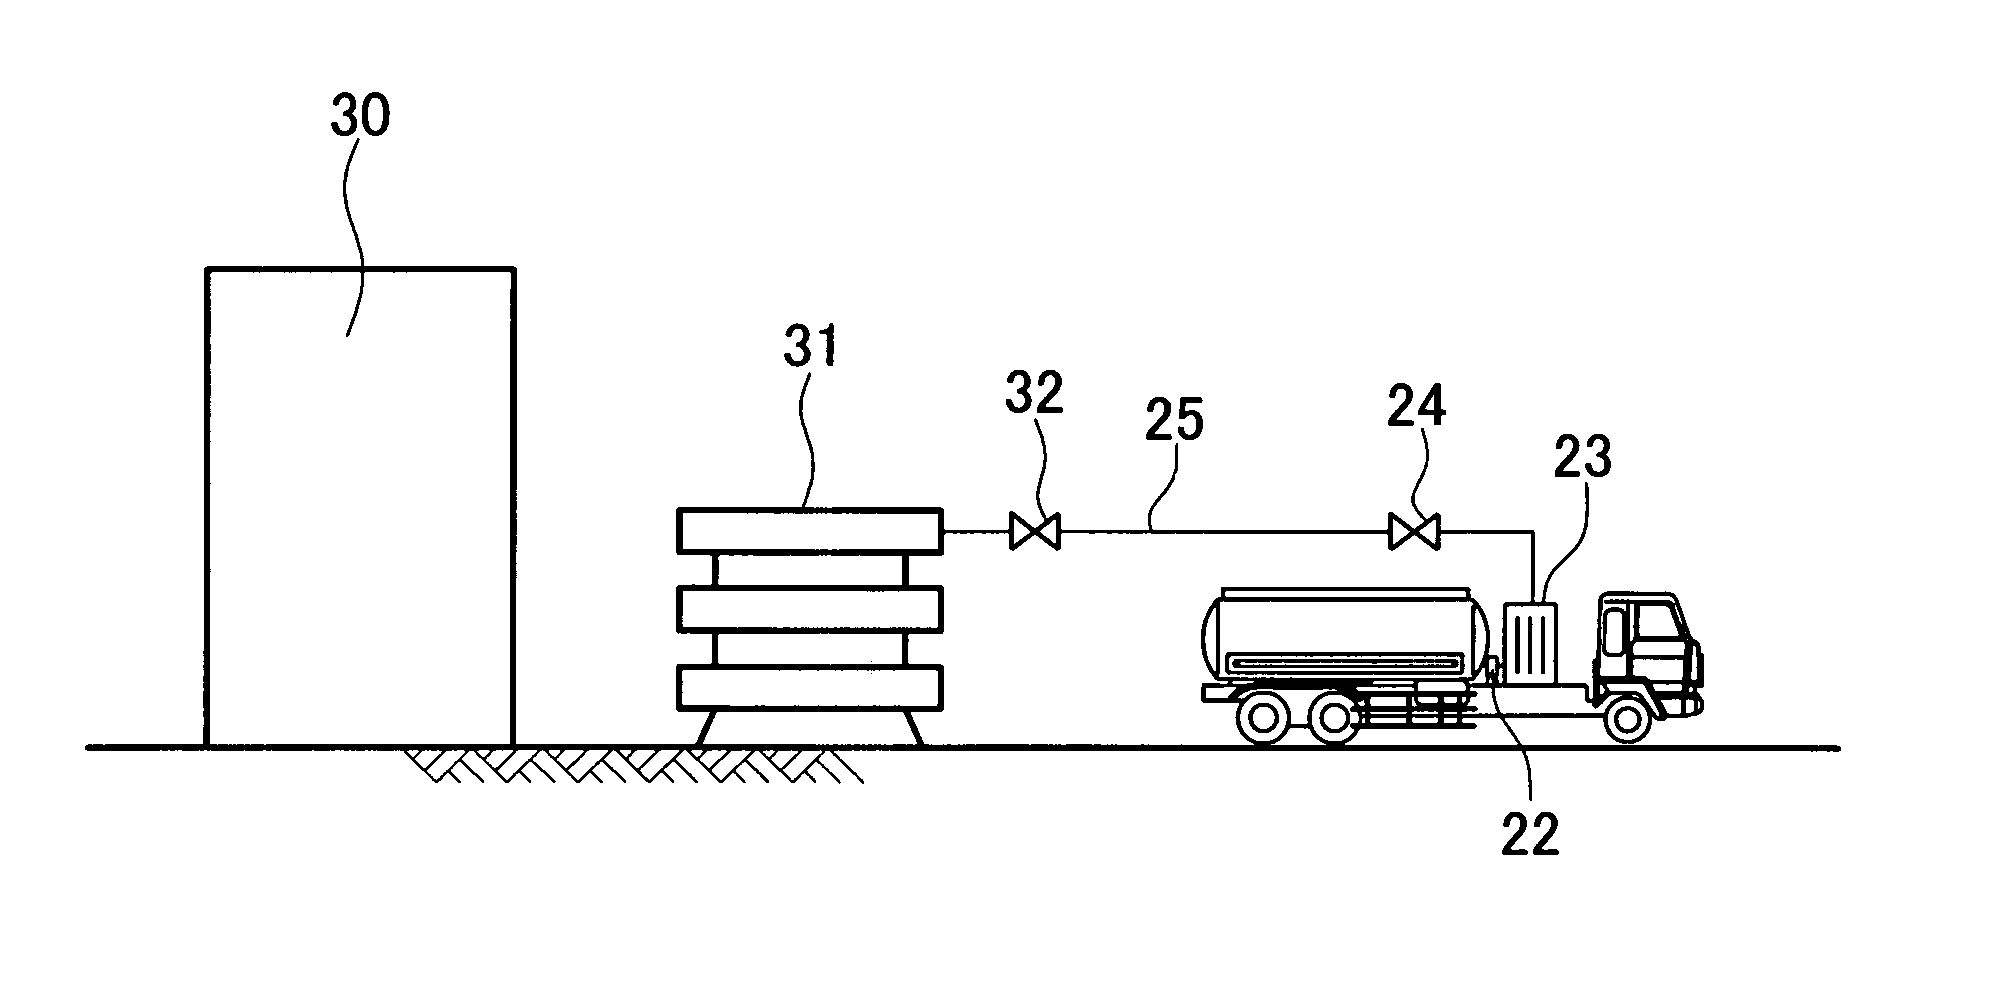 Method for Supplying Hydrogen Gas and Liquefied Hydrogen Delivery Vehicle